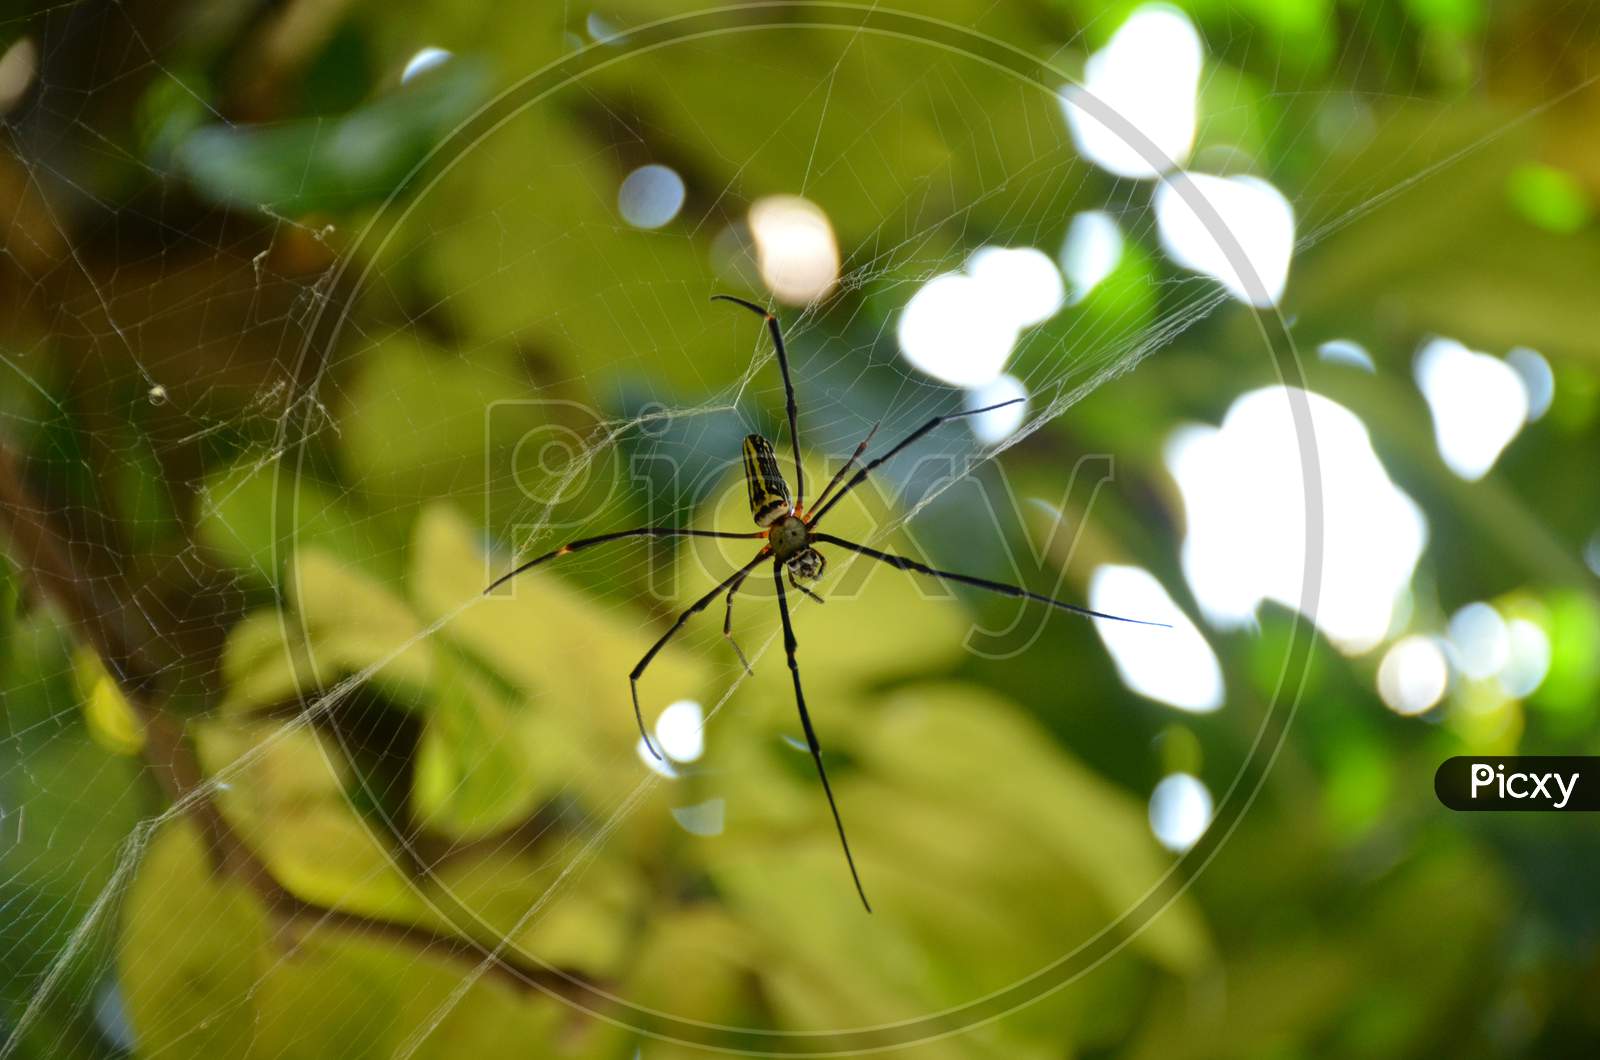 The Black Orange Spider Insect With Web In The Garden.